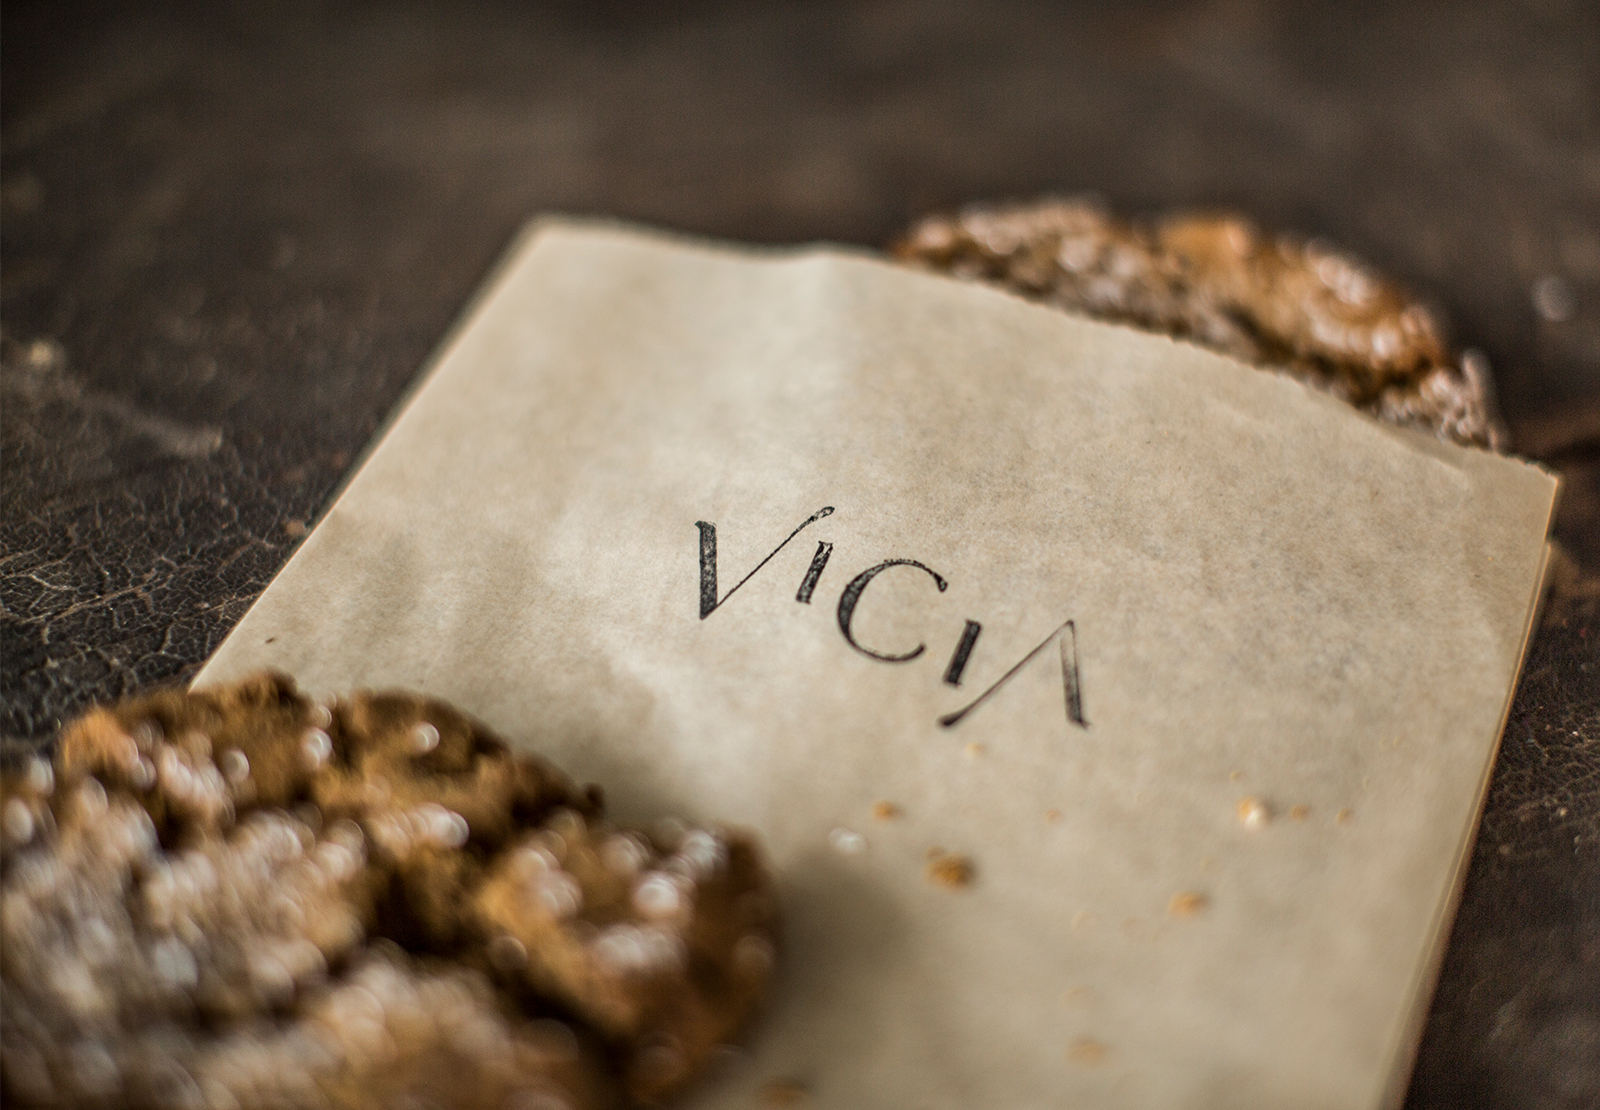 Vicia cookie and branded napkin